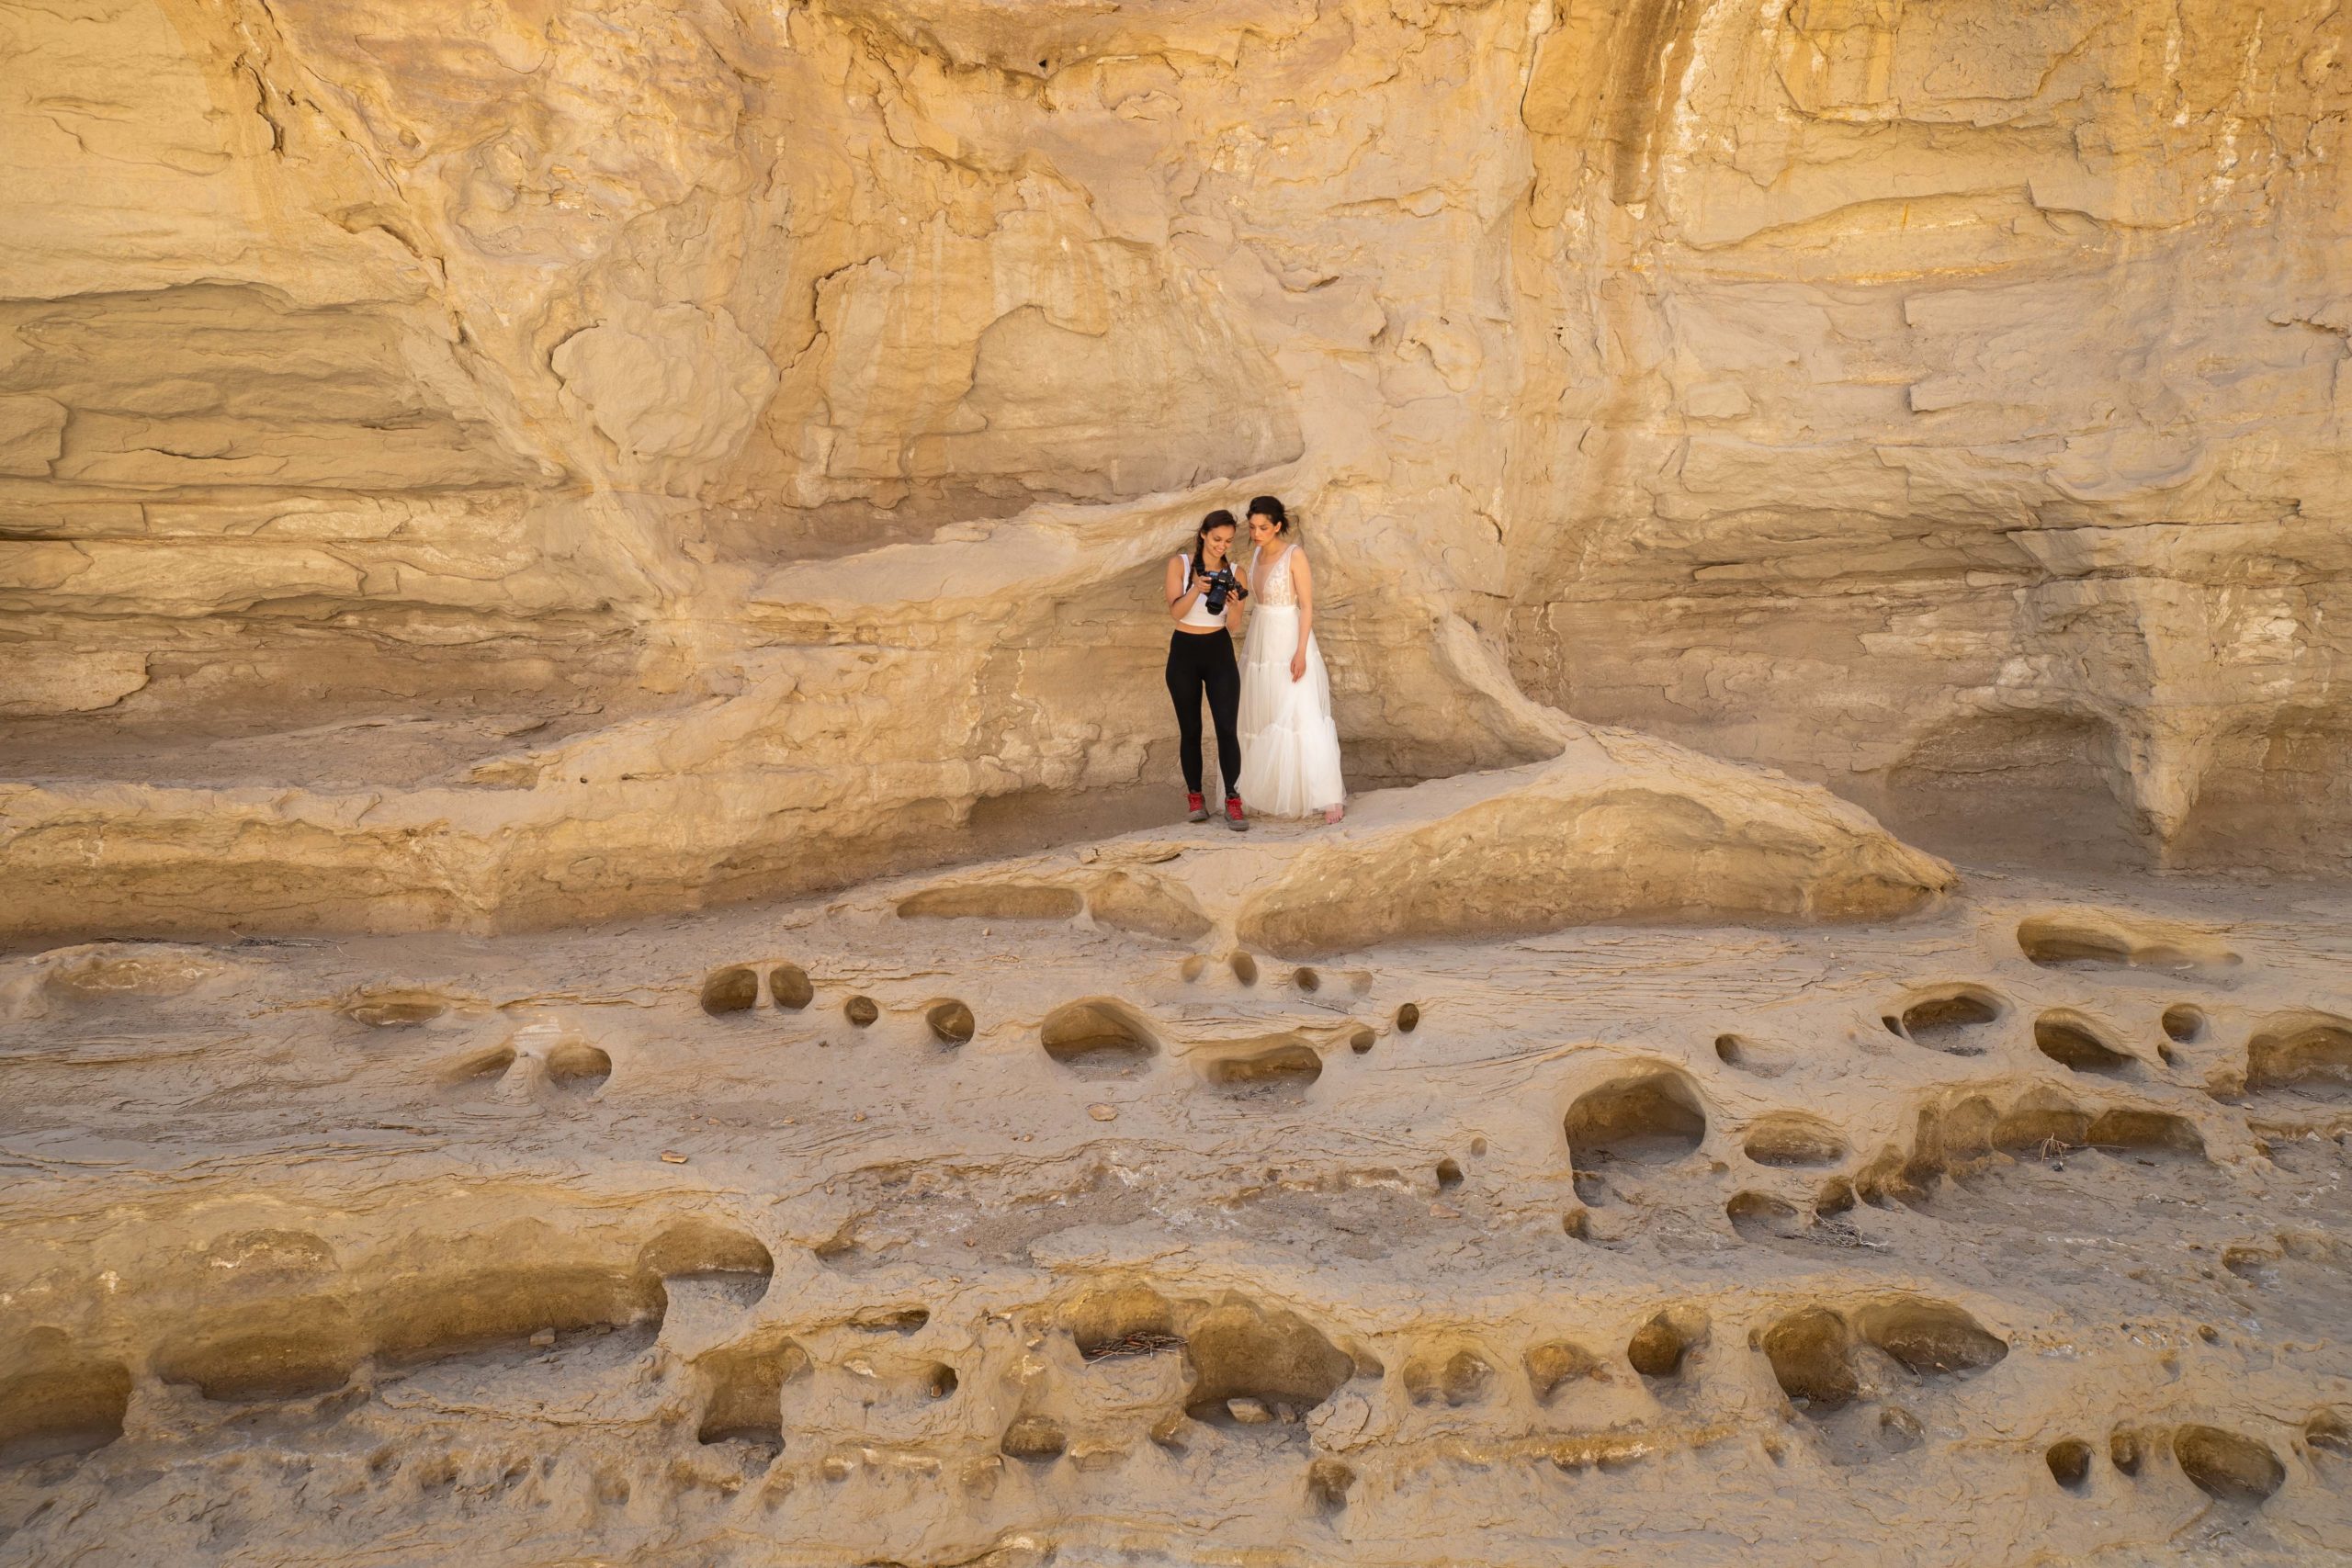 Bailey O'Bar photographs a woman wearing a wedding dress for an elopement in the landscapes of Utah